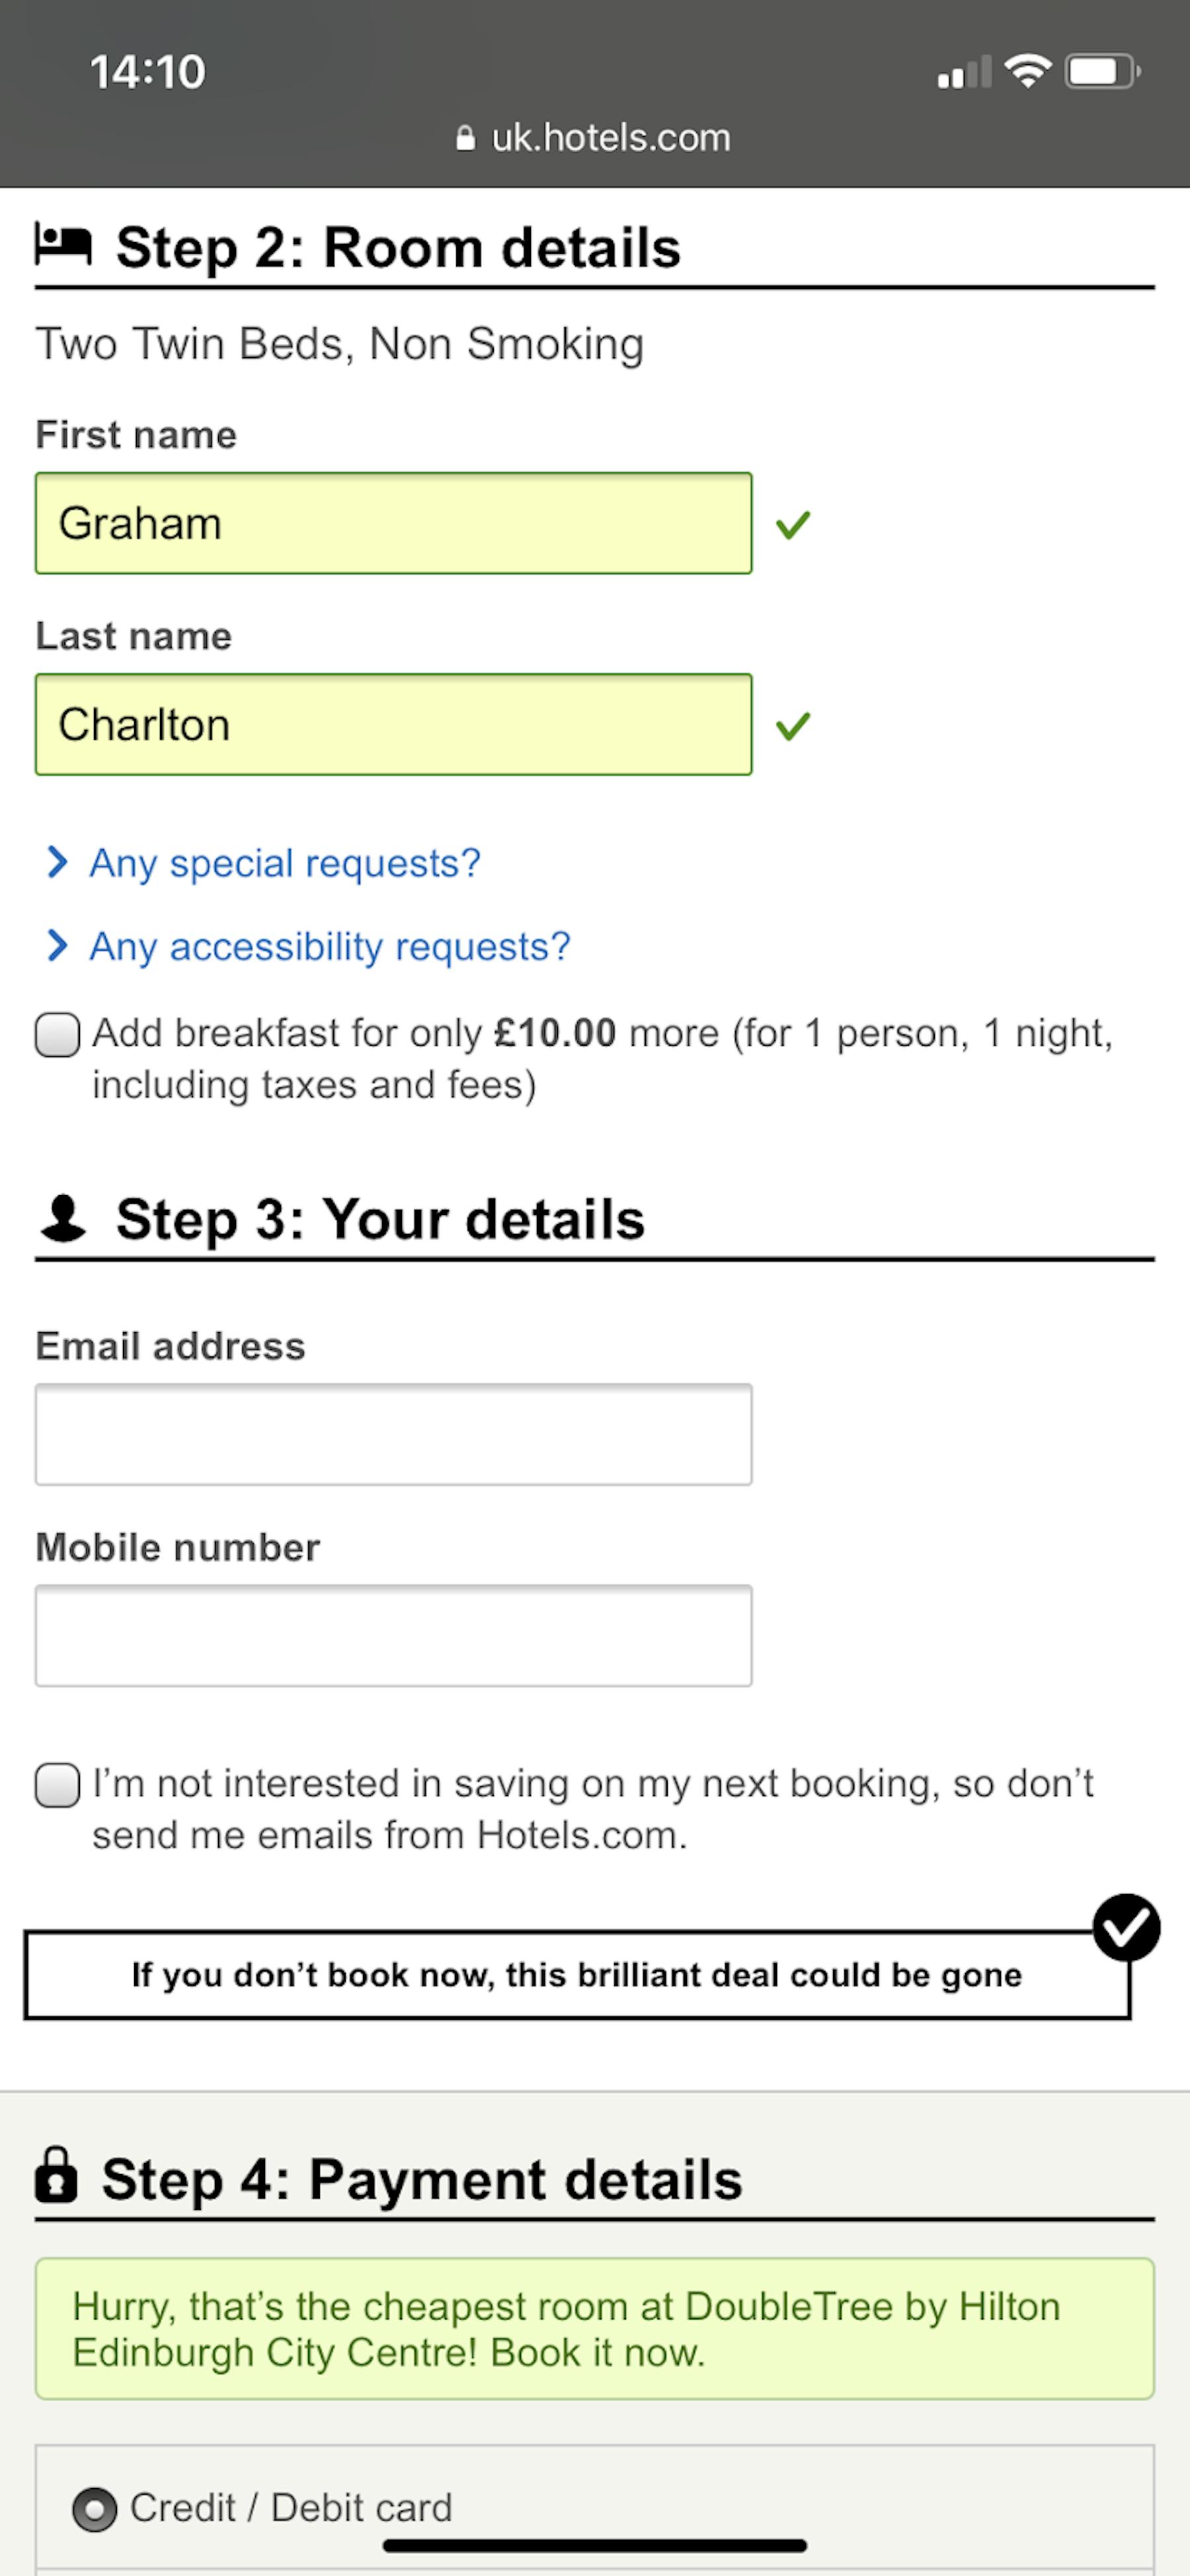 Four UX lessons from Online Travel Agencies (OTAs) | UserZoom